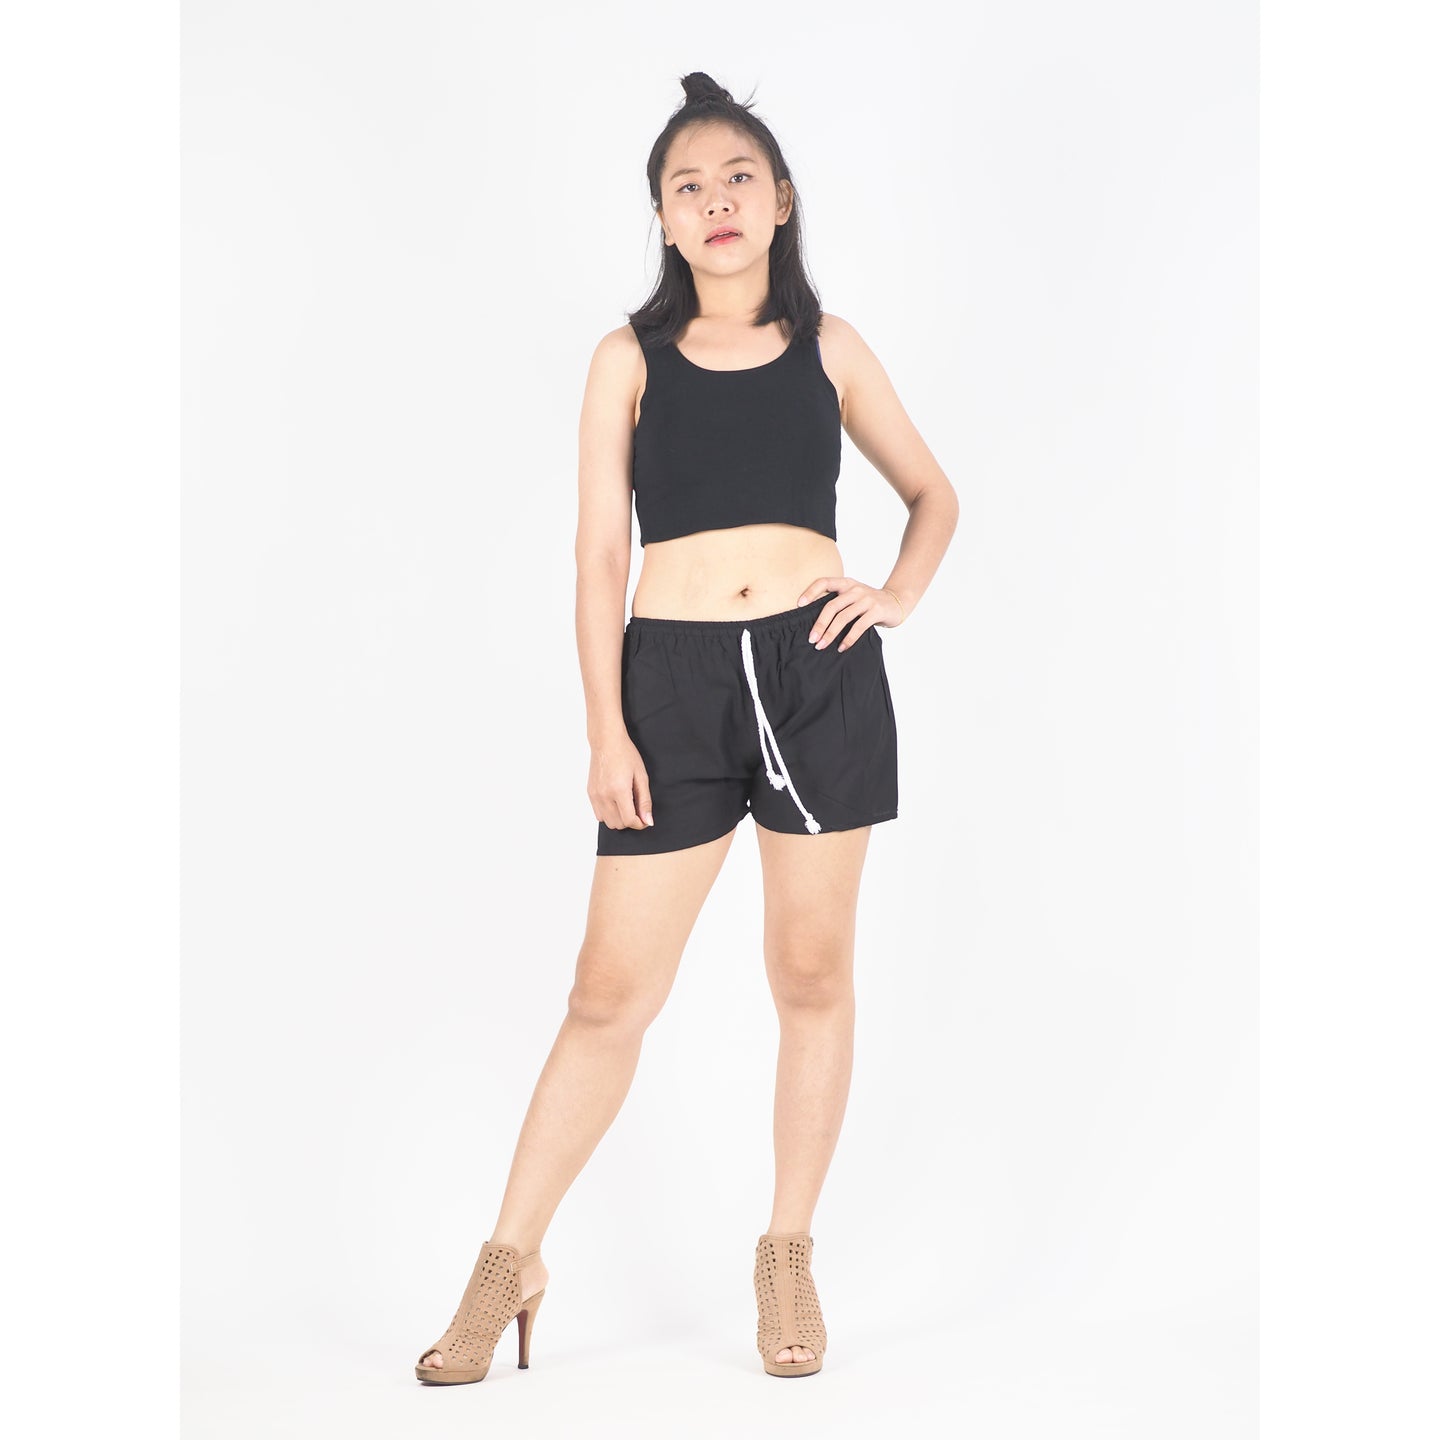 Solid Color Women's Shorts Drawstring Genie Pants in Black PP0142 020000 10